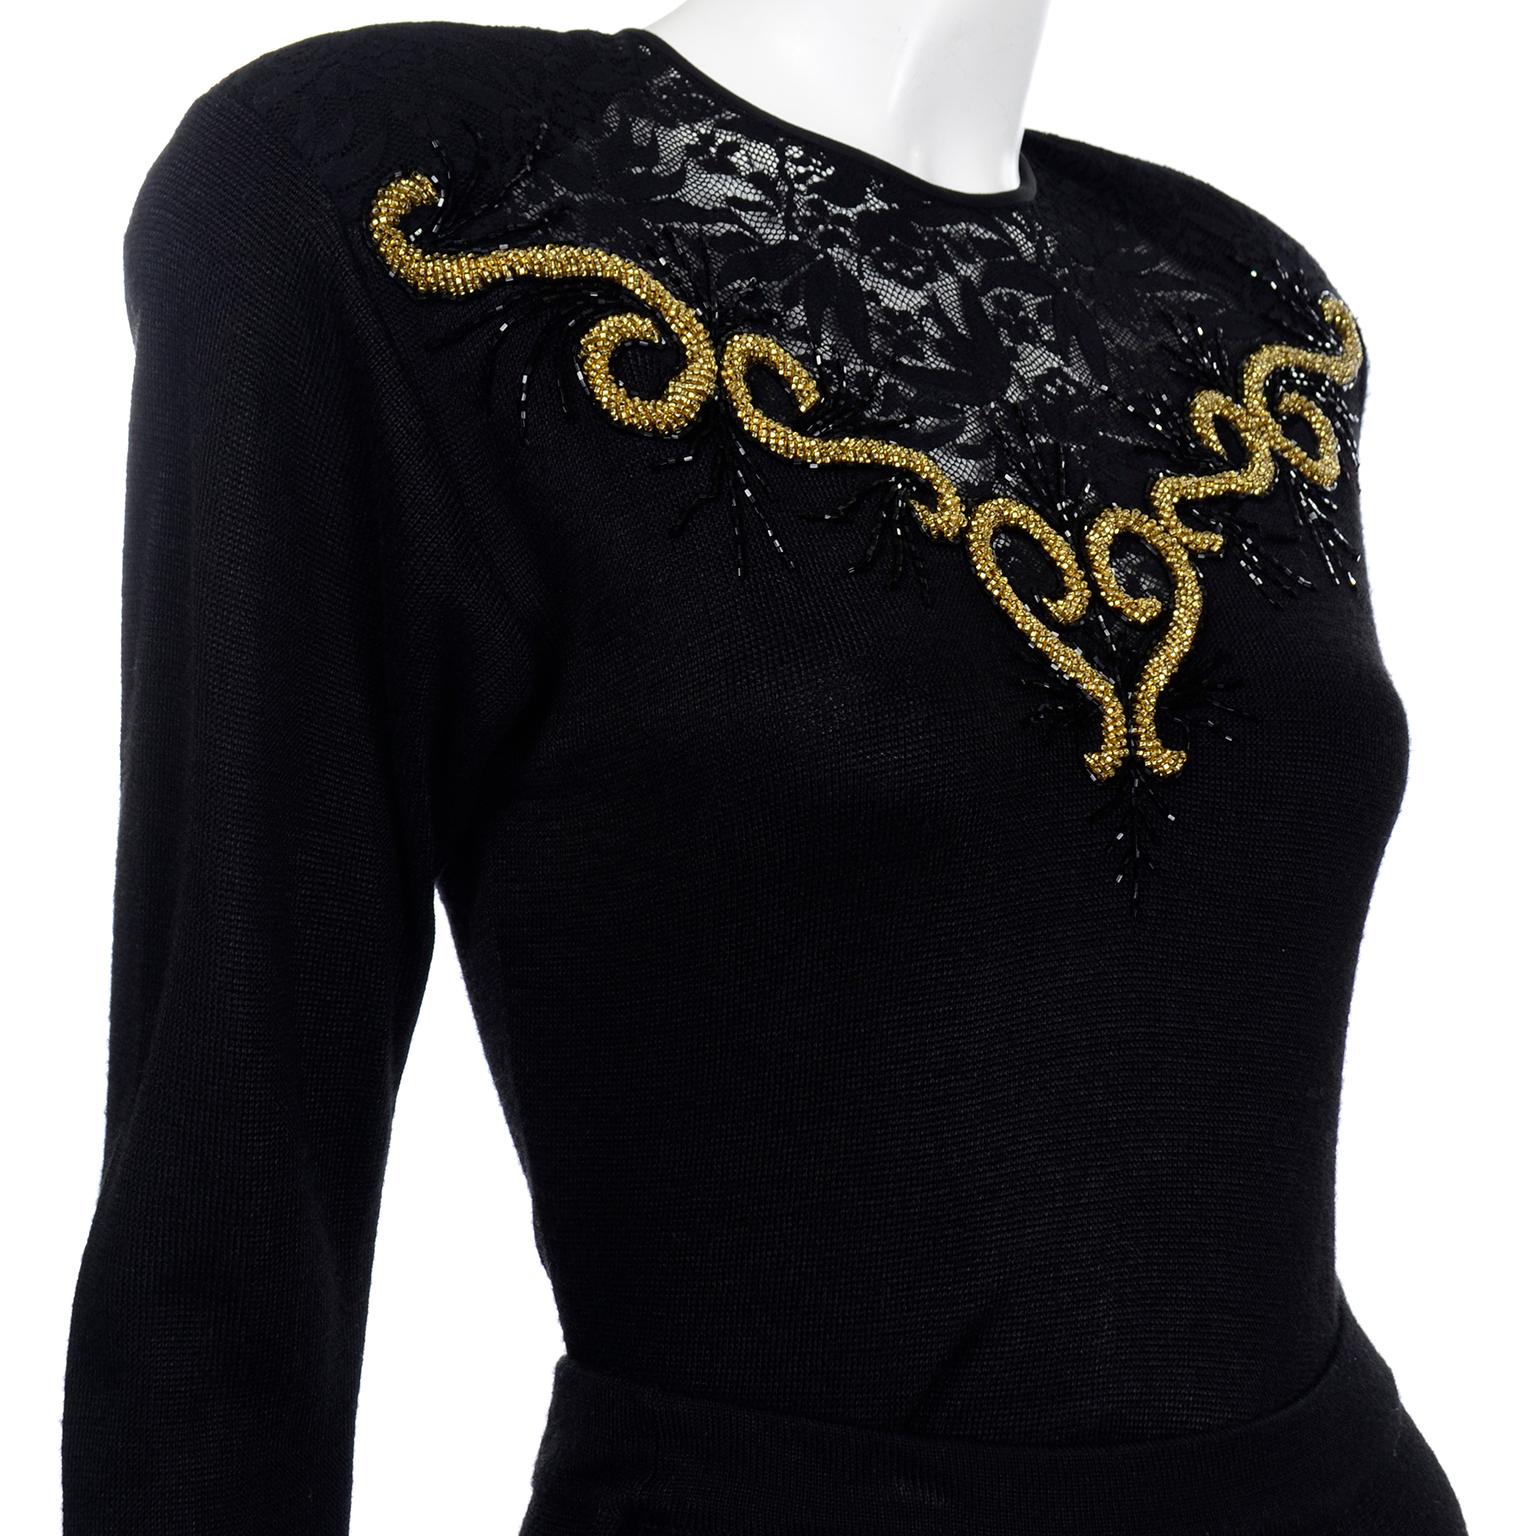 Vintage Diane Freis Black Knit 2pc Dress With Gold Metallic Embroidery and Lace 4